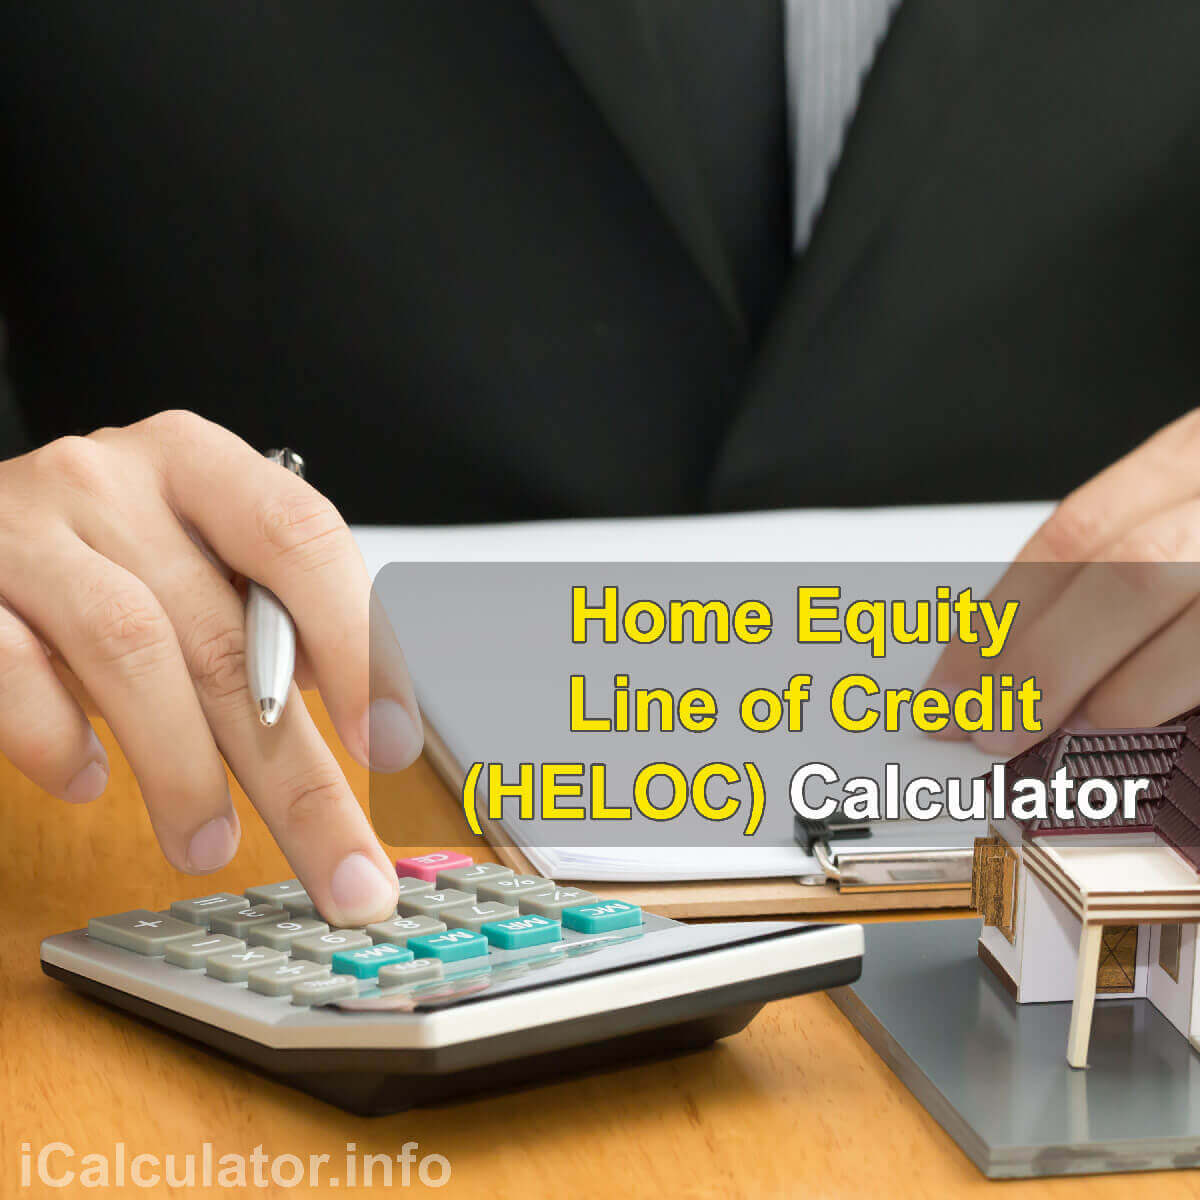 HELOC calculator | Home Equity Line of Credit Calculator. This image provides details of how to Home Equity Line of Credit using a calculator and notepad. By using the rule of home equity line of credit formula, annual interest rate formula and repayments formula, the HELOC Calculator provides a true calculation of the interest rate on a Home Equity Loan.